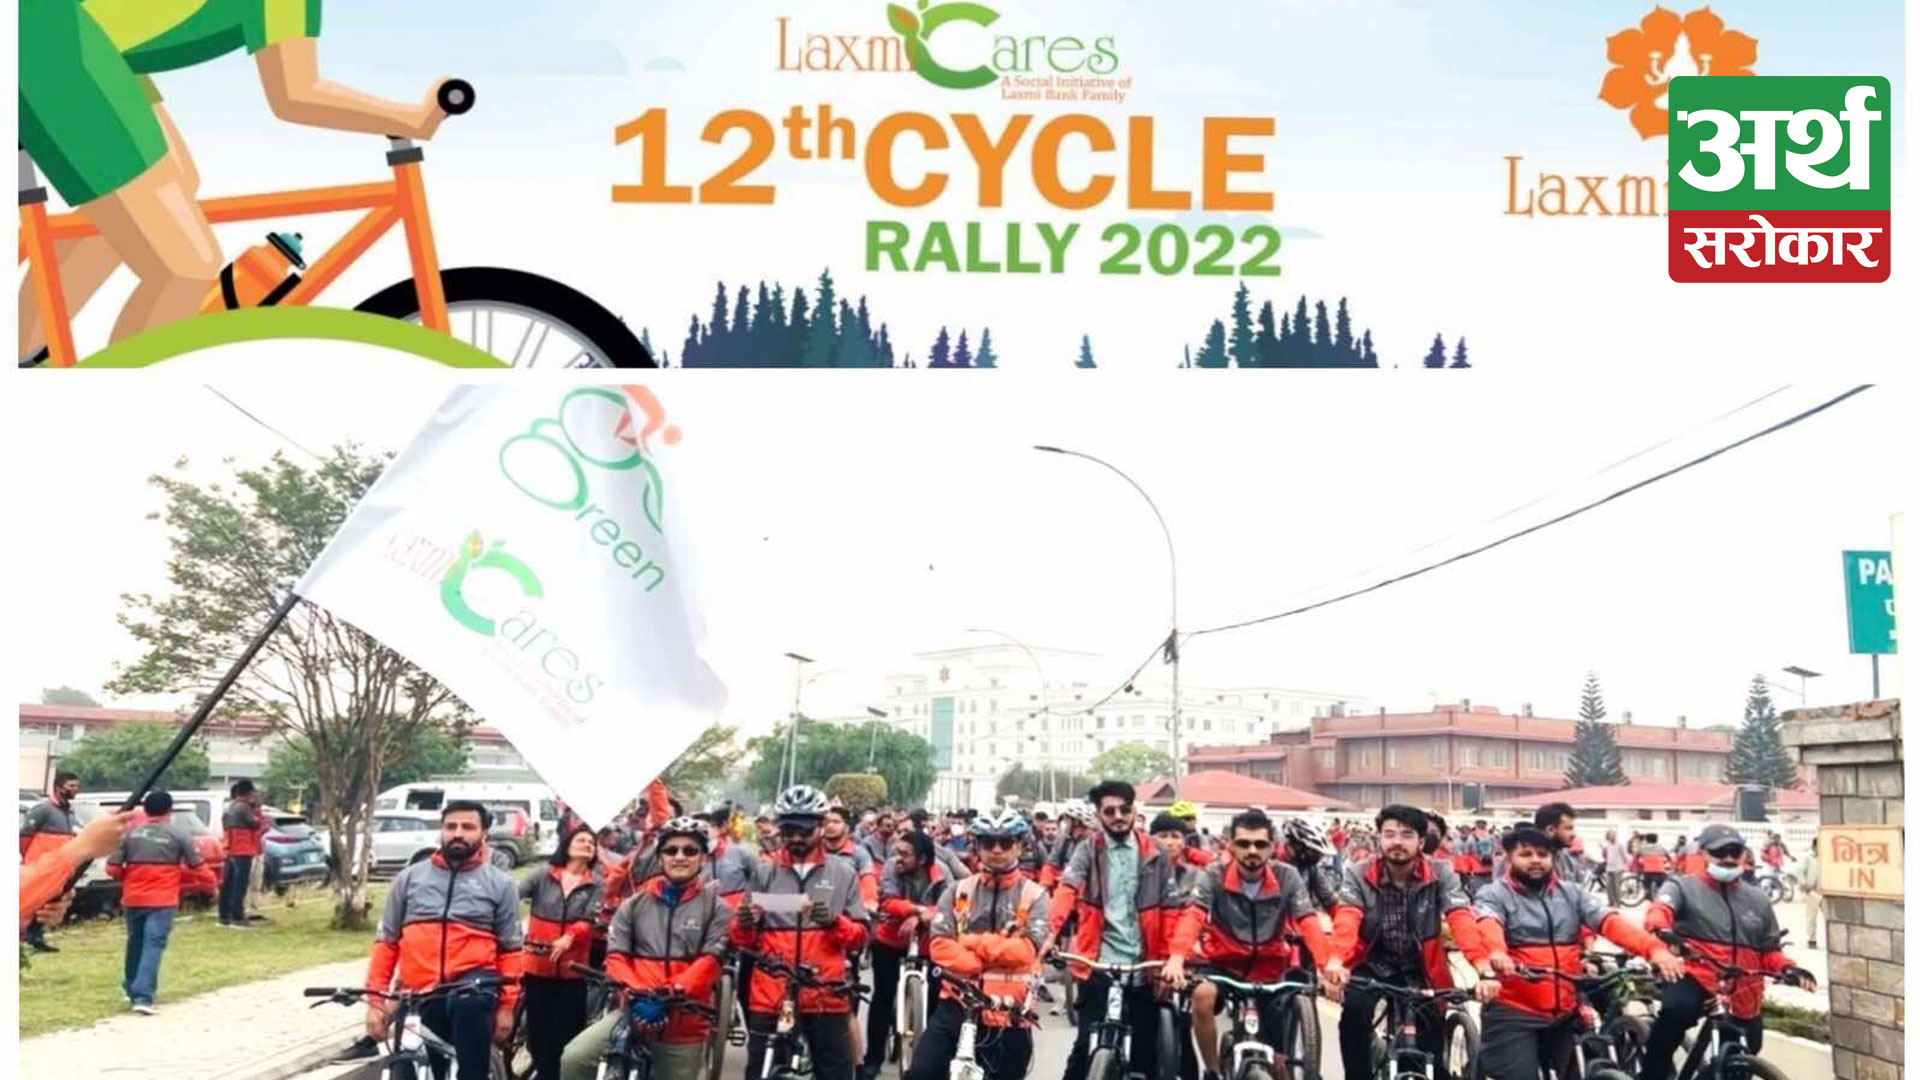 Huge crowd turns up for Laxmi Cares Cycle Rally